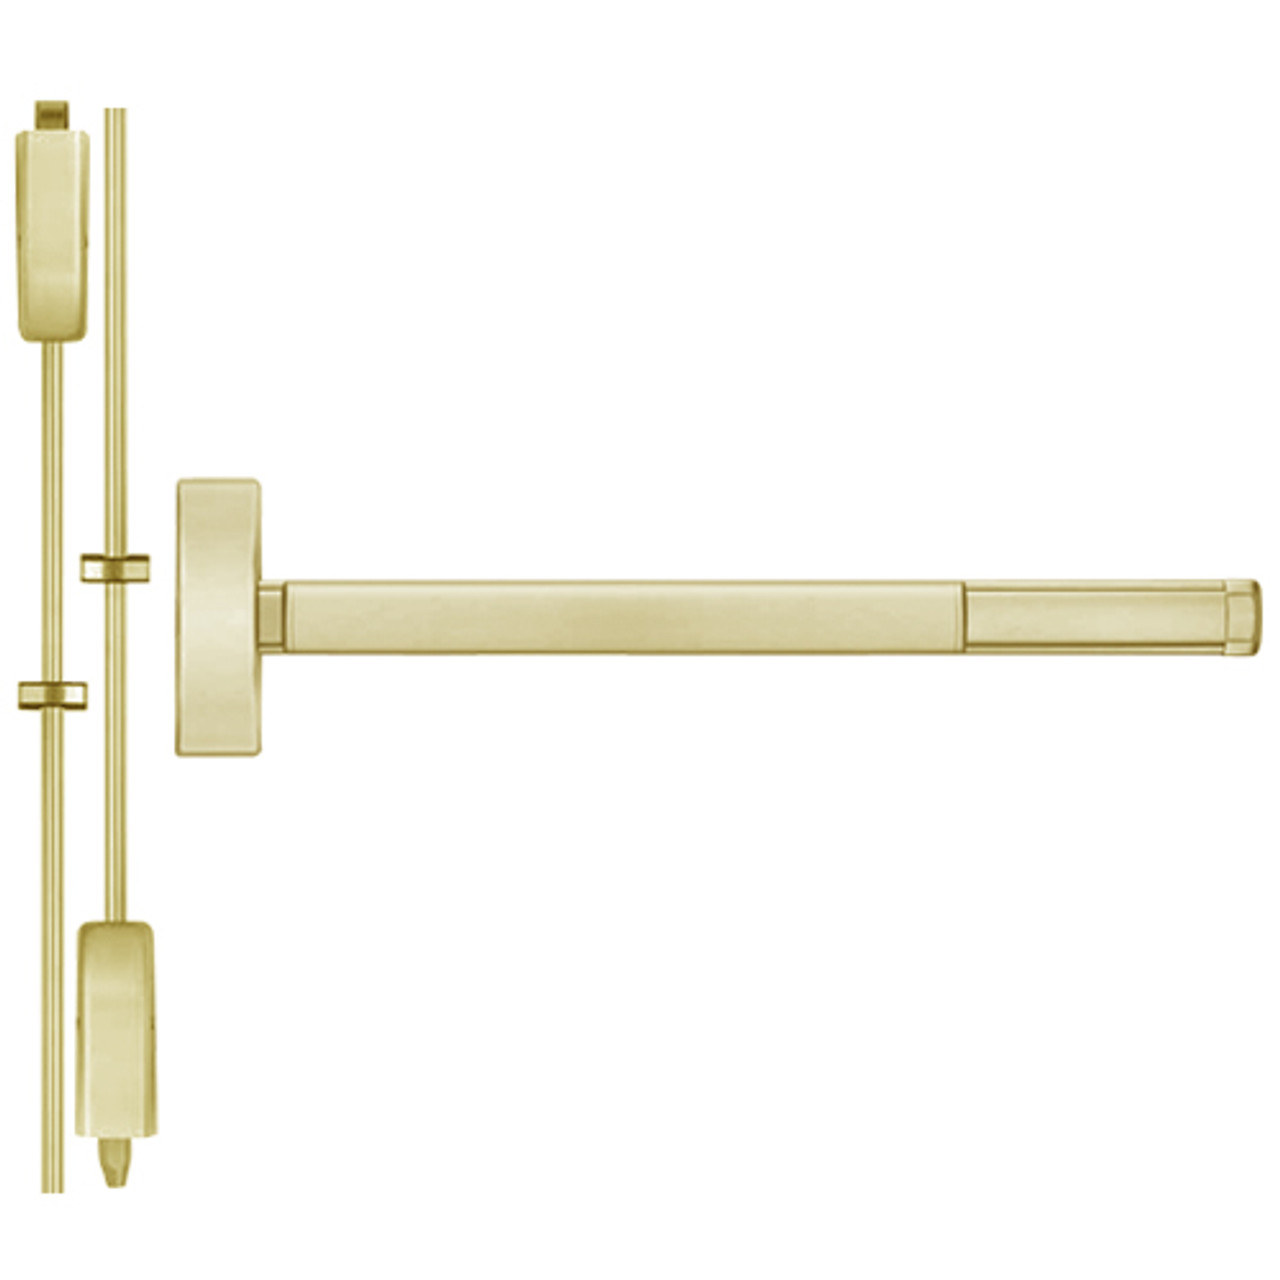 DEFL2203LBR-606-36 PHI 2200 Series Fire Rated Apex Surface Vertical Rod Device with Delayed Egress Prepped for Key Retracts Latchbolt in Satin Brass Finish